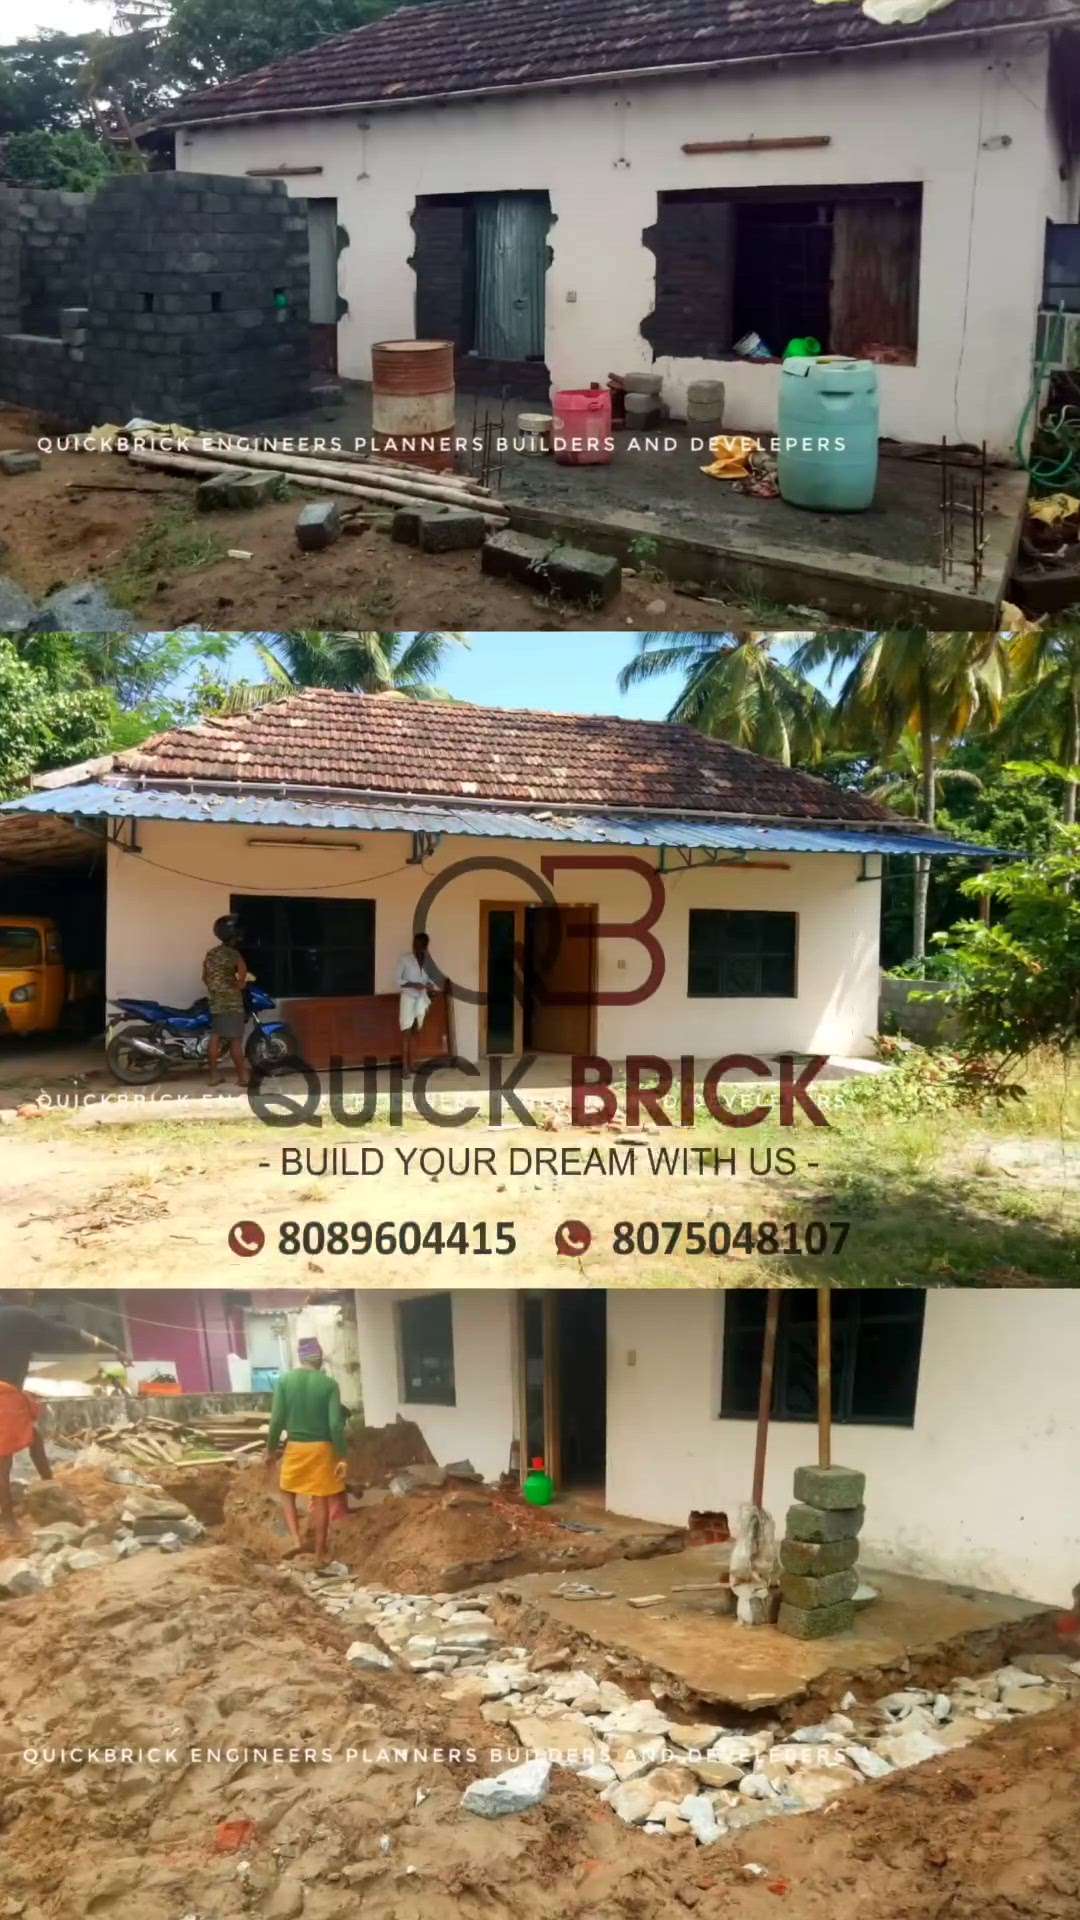 EXISTING BUILDING 1200 SQFEET TIELD ROOFHOUSE
RENOVATED ARE 880 SQFEET RCC ROOF HOUSE
4BHK RENOVATED SITE AT PUDUNAGARAM, PALAKKAD



THANK YOU.... HAKKIM ANNAN &  FAMLY
....

May your new home be filled with love and good health...
.
.
.
Quickbrick engineers planners builders and developers
Contact 8075048107
qbbuilders11@gmail.com

#quickbrick #qbbuilders #instagood #instalike #insta #instagram #instadaily
#insta #trendingreels #trending #malayalam
#keralagodsowncountry #kerala #interiordesign
#interiordesigner#Interiordesign#Kitchen
HInstagood #instaliķe #instagay #interior #design
tdesign #designer #viral #viralvideos #viralreels
treels #reelsinstagram #trendingreels #trend
#trendingnow #interiordesign #reels
treelsinstagram #instagram #reelsindia #viral
#viralreels #viralvideos #trendingnow #trending